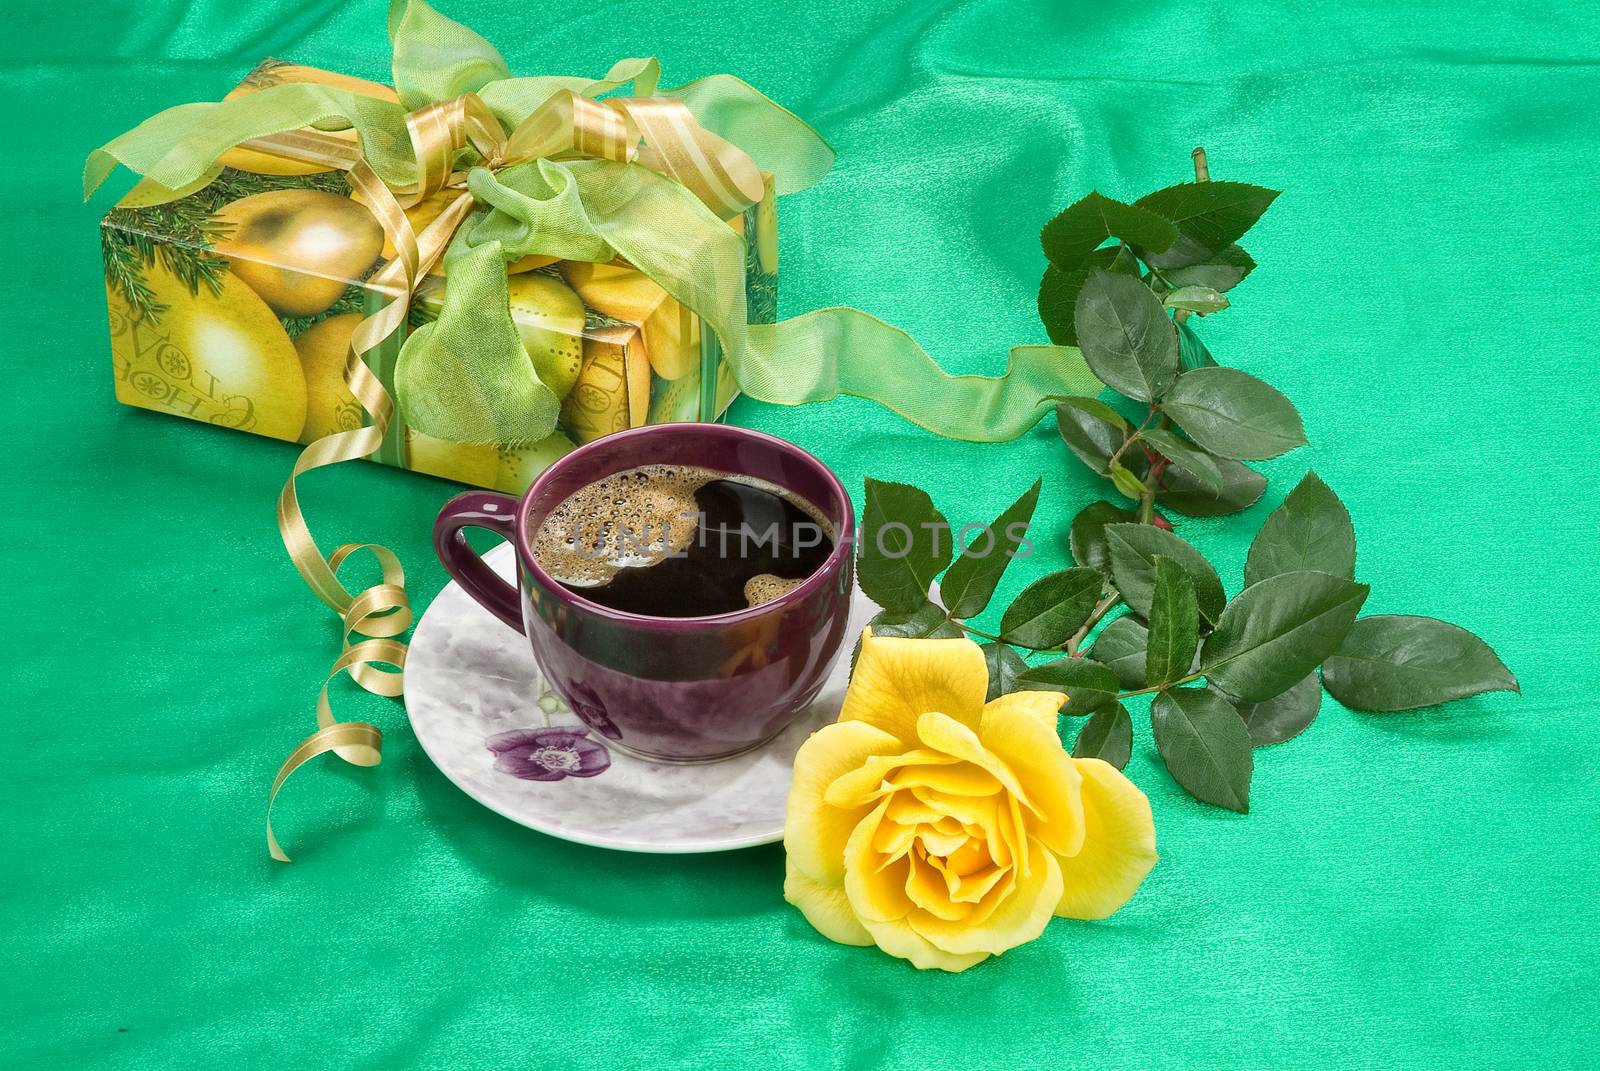 Gift, Cup And Rose by Fotoskat